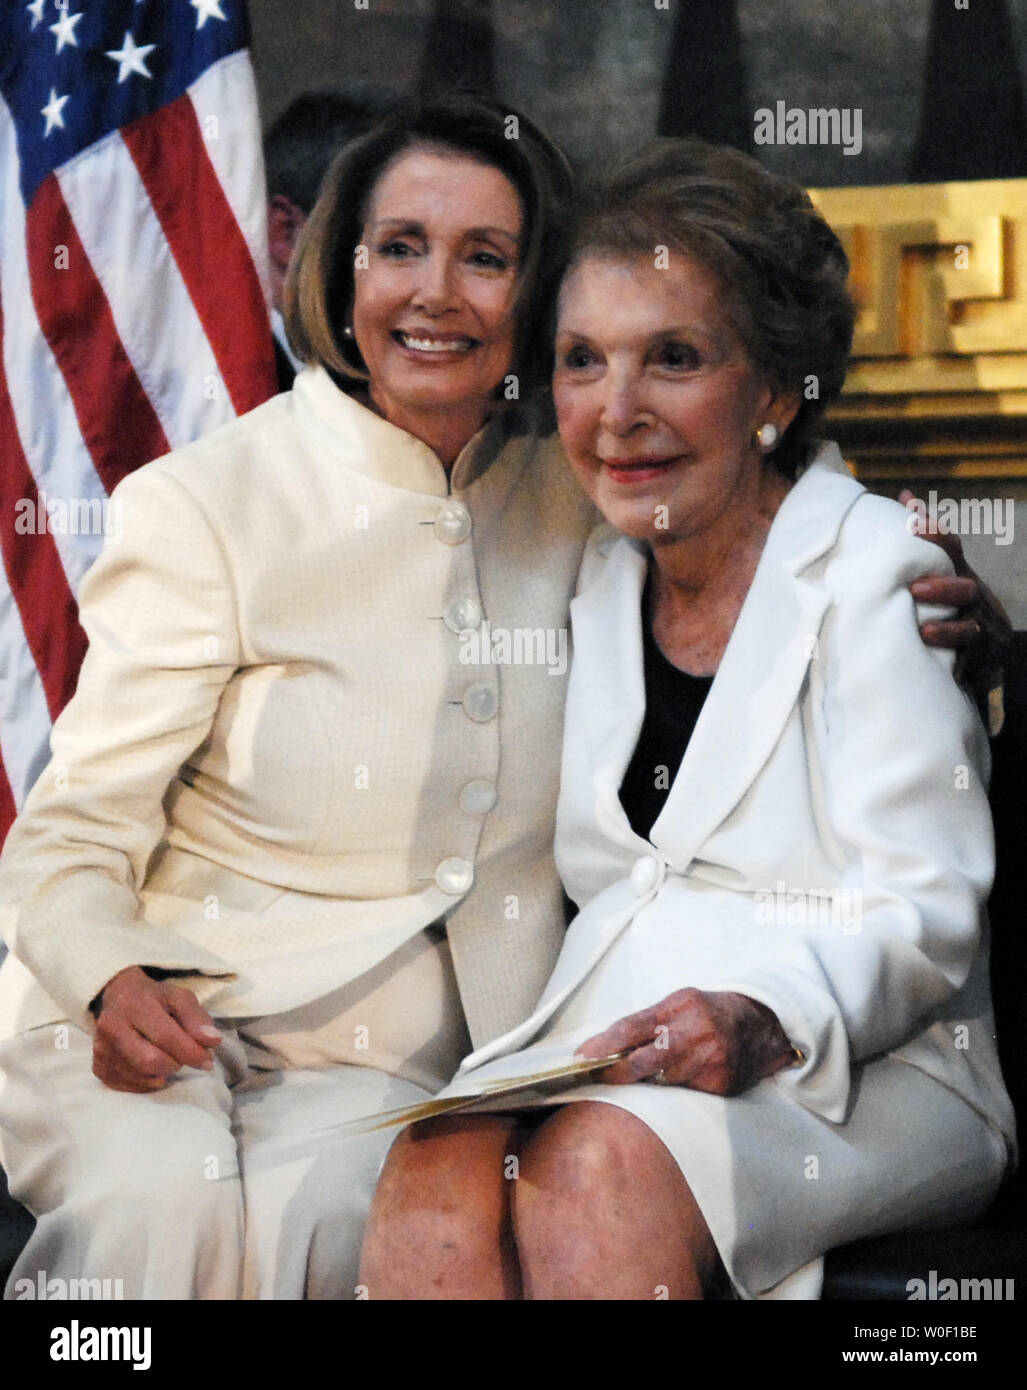 Speaker of the House Nancy Pelosi (D-CA) (L) hugs former First Lady Nancy Reagan at an unveiling ceremony for a statue of former U.S. President Ronald Reagan in the Rotunda of the U.S. Capitol building in Washington on June 3, 2009. The statue will become part of the National Statuary Hall Collection. (UPI Photo/Alexis C. Glenn) Stock Photo